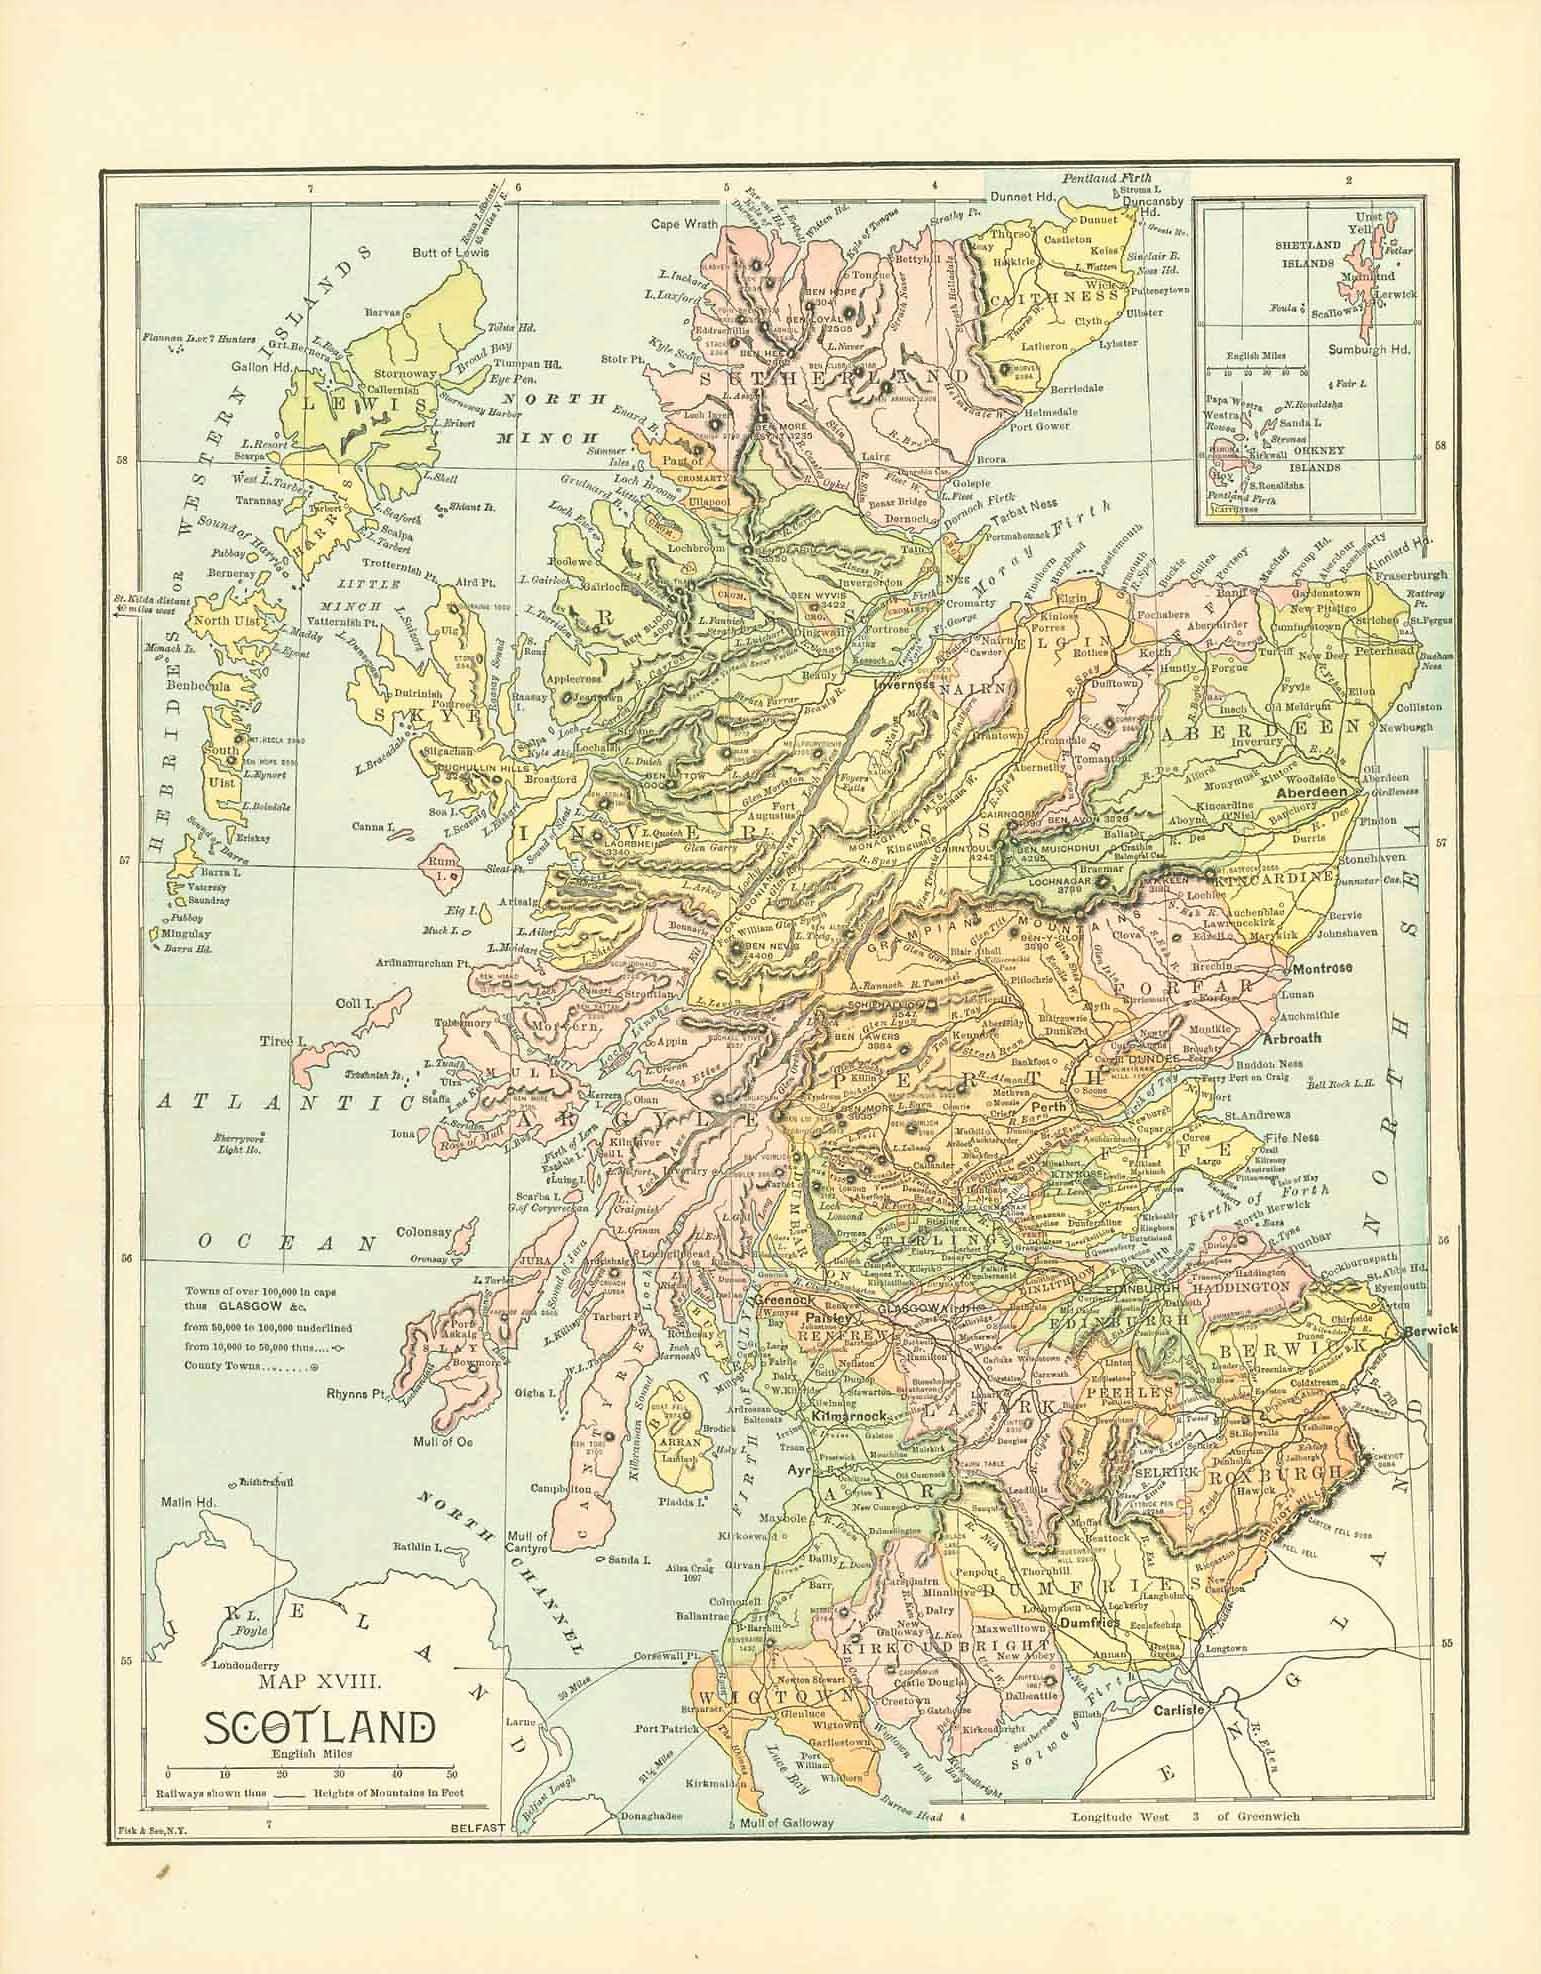 "Map XVIII Scotland"  Wood engraving map printed in color and published 1885 in New York.  Original antique print   In the upper right corner is a detailed inset of the Shetland and Orkney Islands.